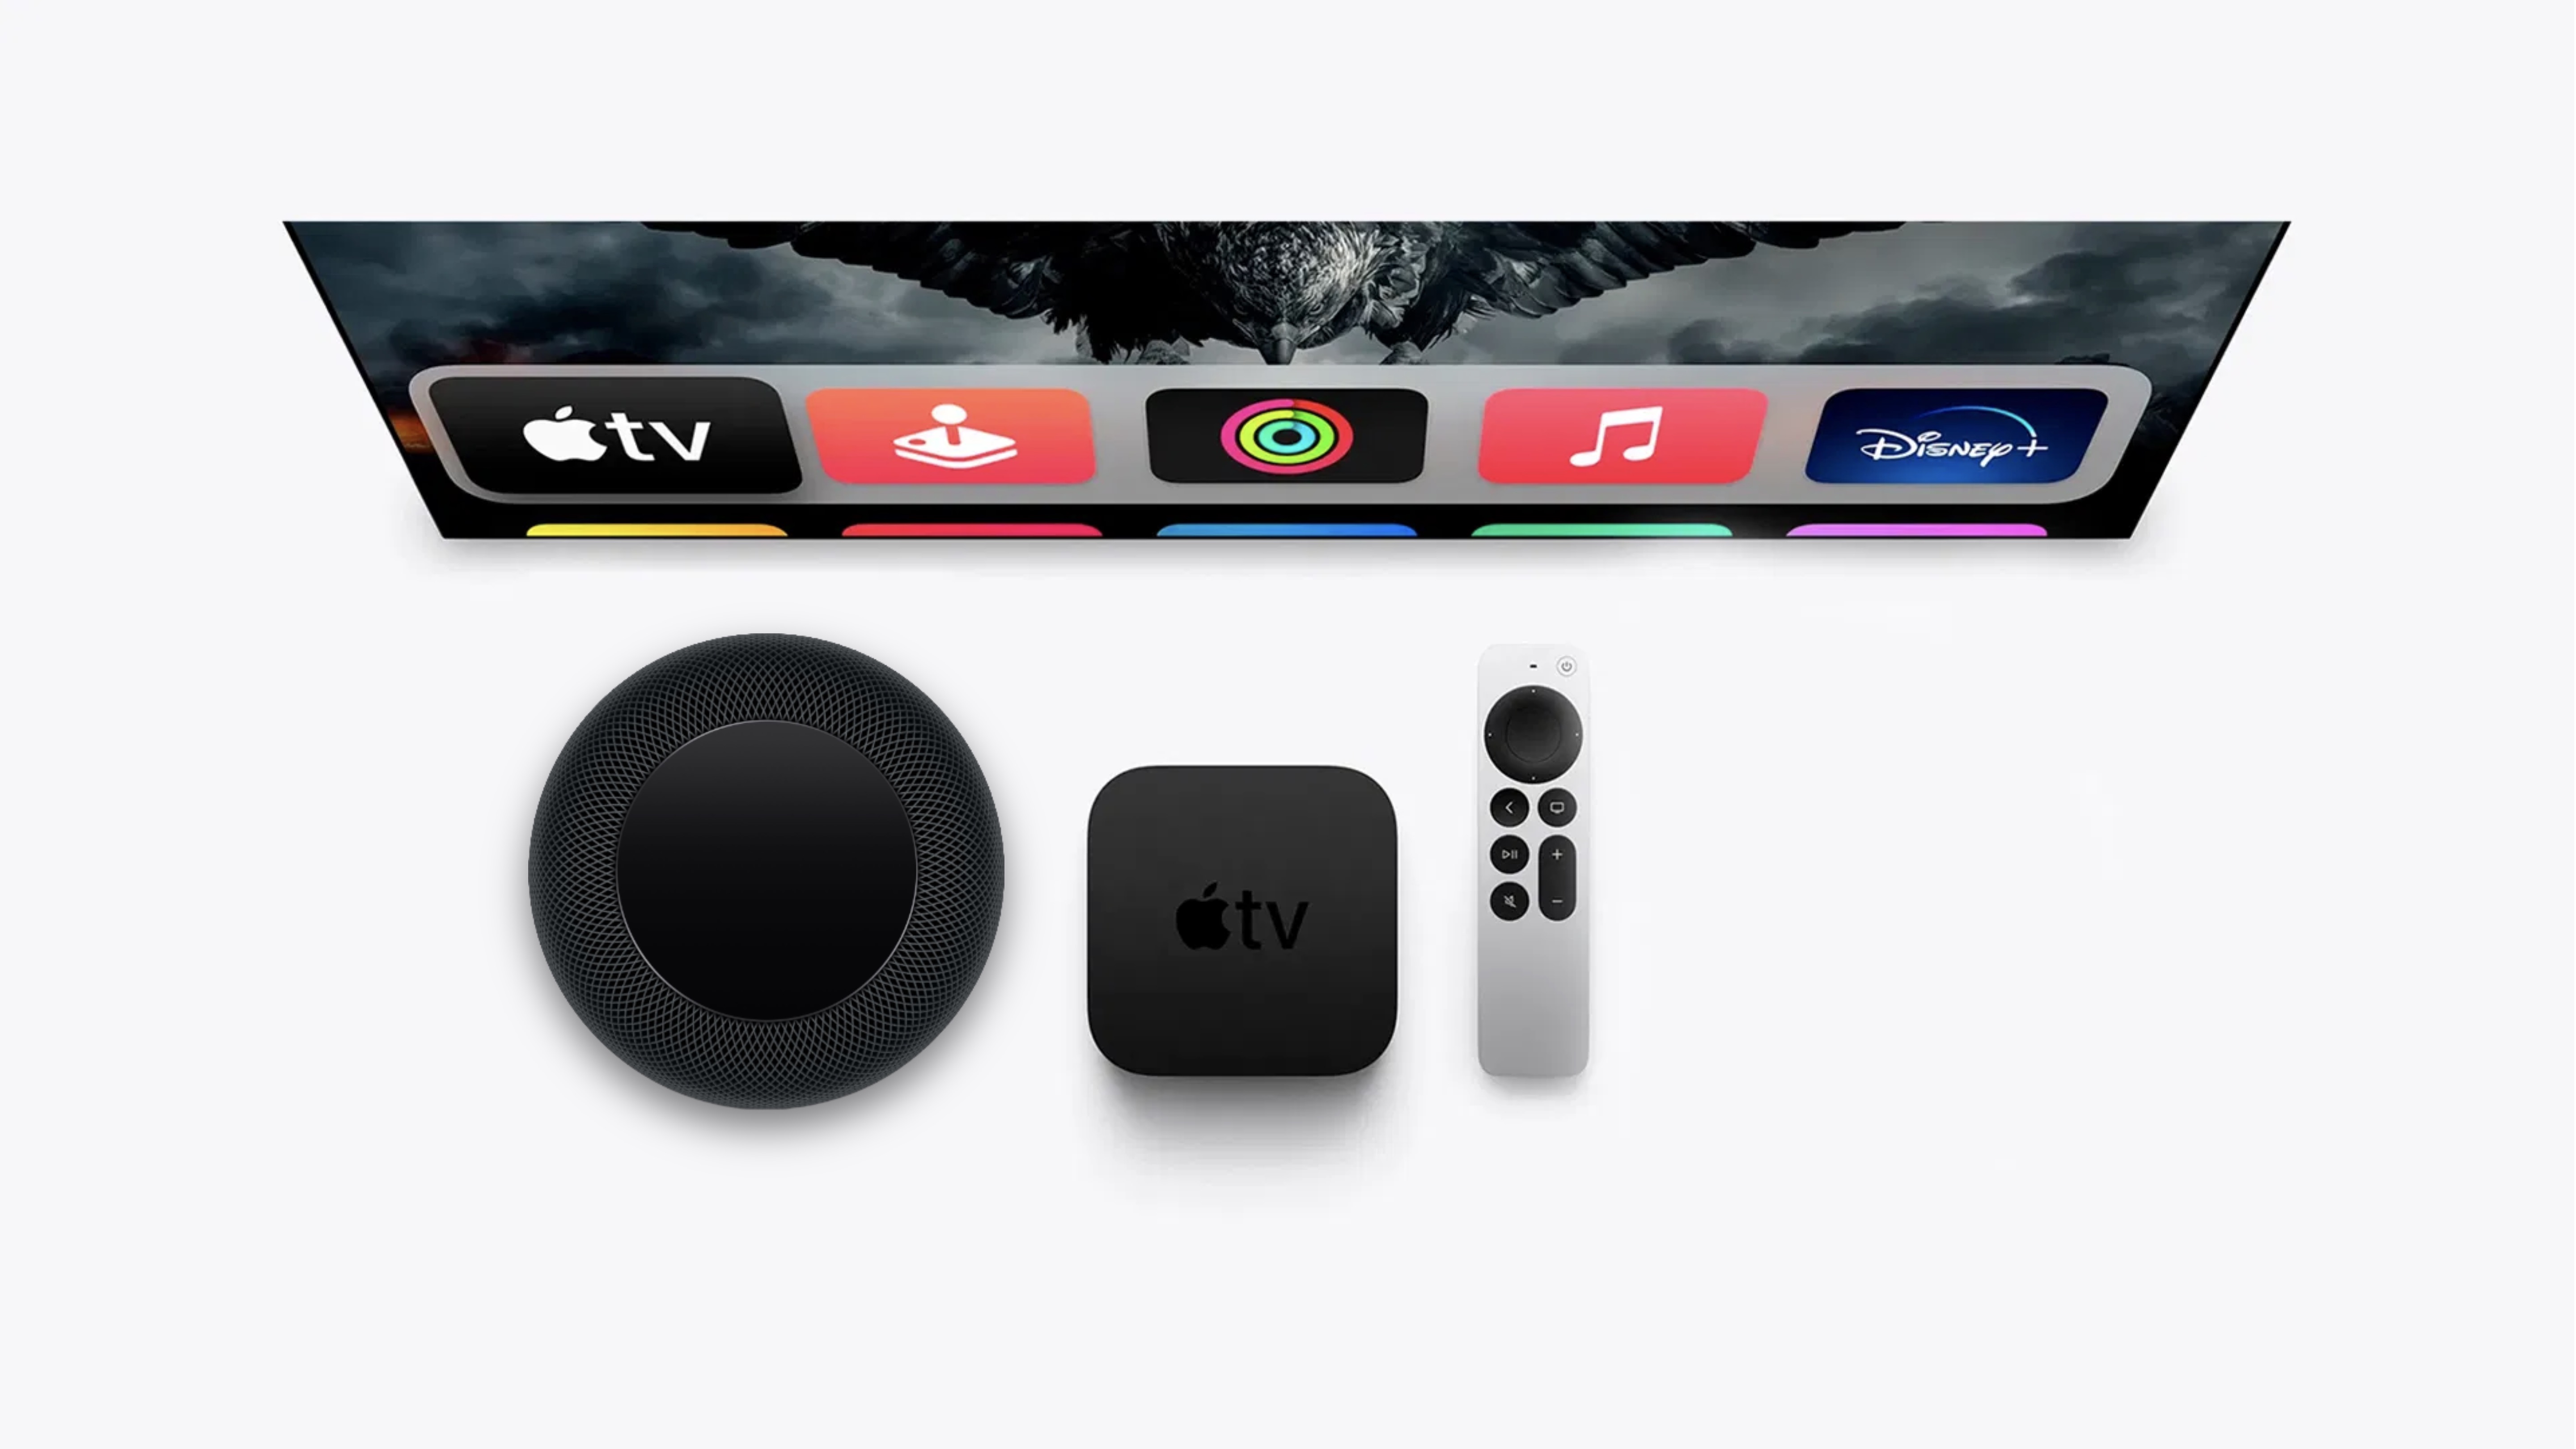 Billy fond pulver Apple releases tvOS 15.1 beta 3 to developers - 9to5Mac